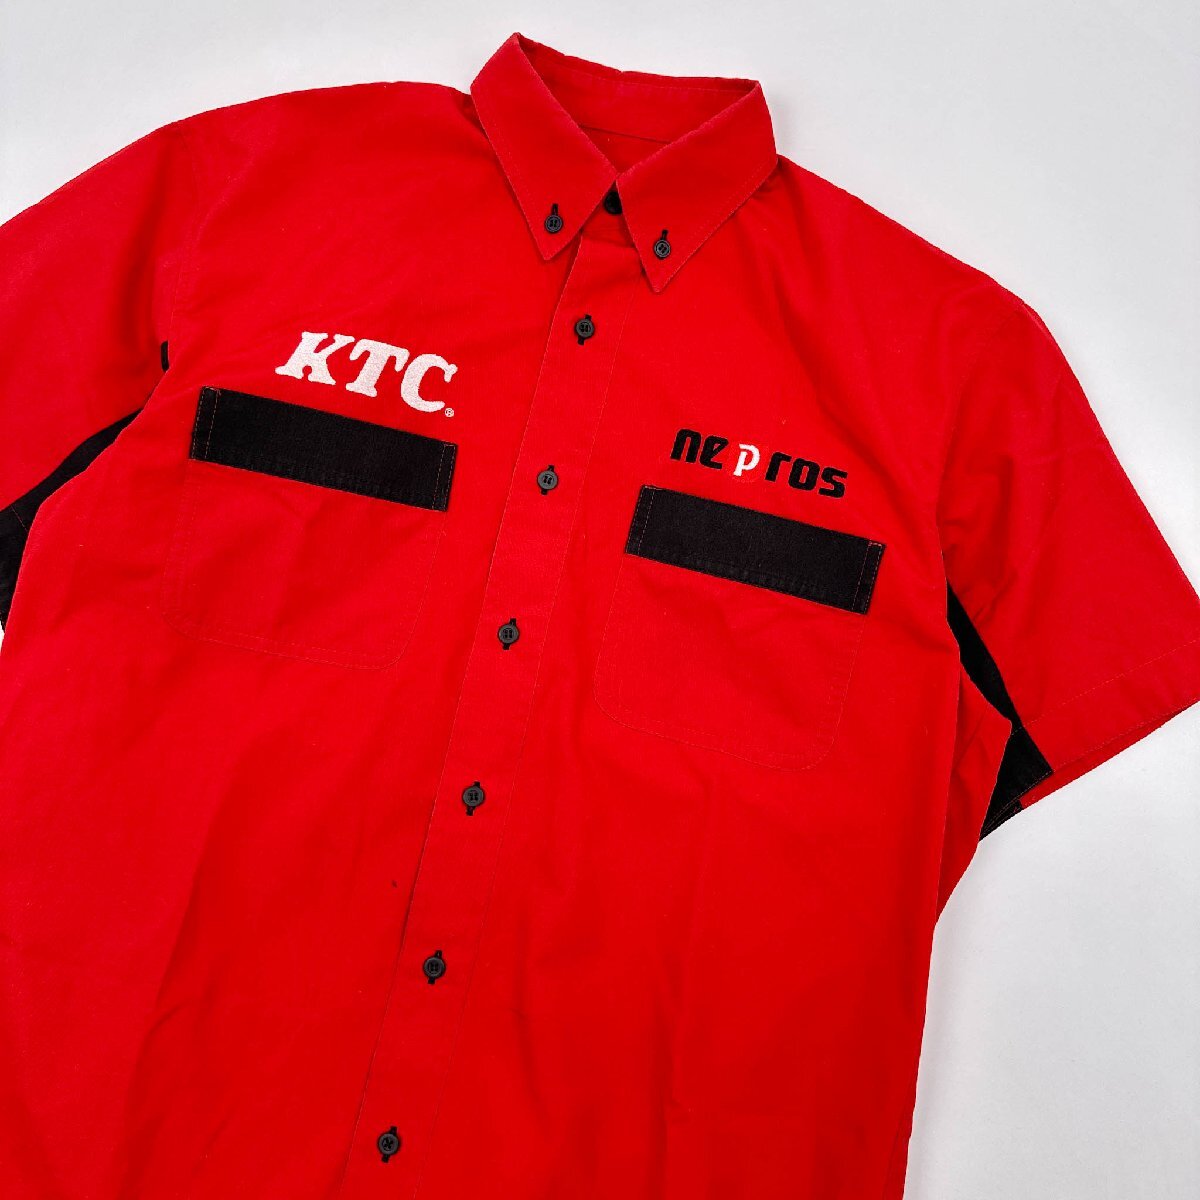 KTC KYOTO TOOL nepros BD button down short sleeves shirt size / red red group / men's Kyoto tool automobile 